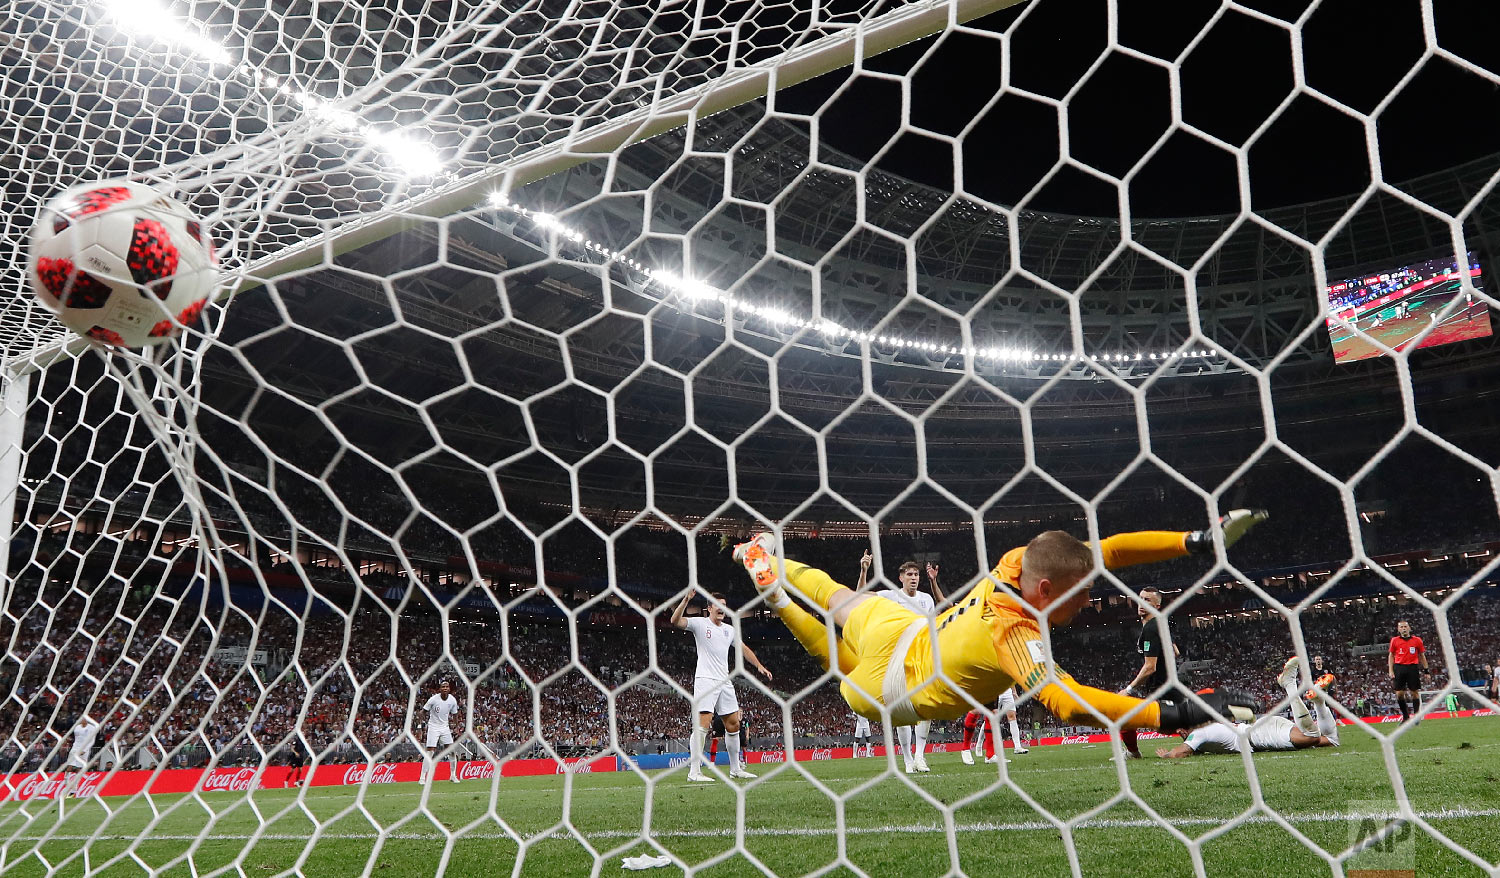  Croatia's Ivan Perisic scores his side's first goal past England goalkeeper Jordan Pickford during the semifinal match between Croatia and England at the 2018 soccer World Cup in the Luzhniki Stadium in Moscow, Russia, Wednesday, July 11, 2018. (AP 